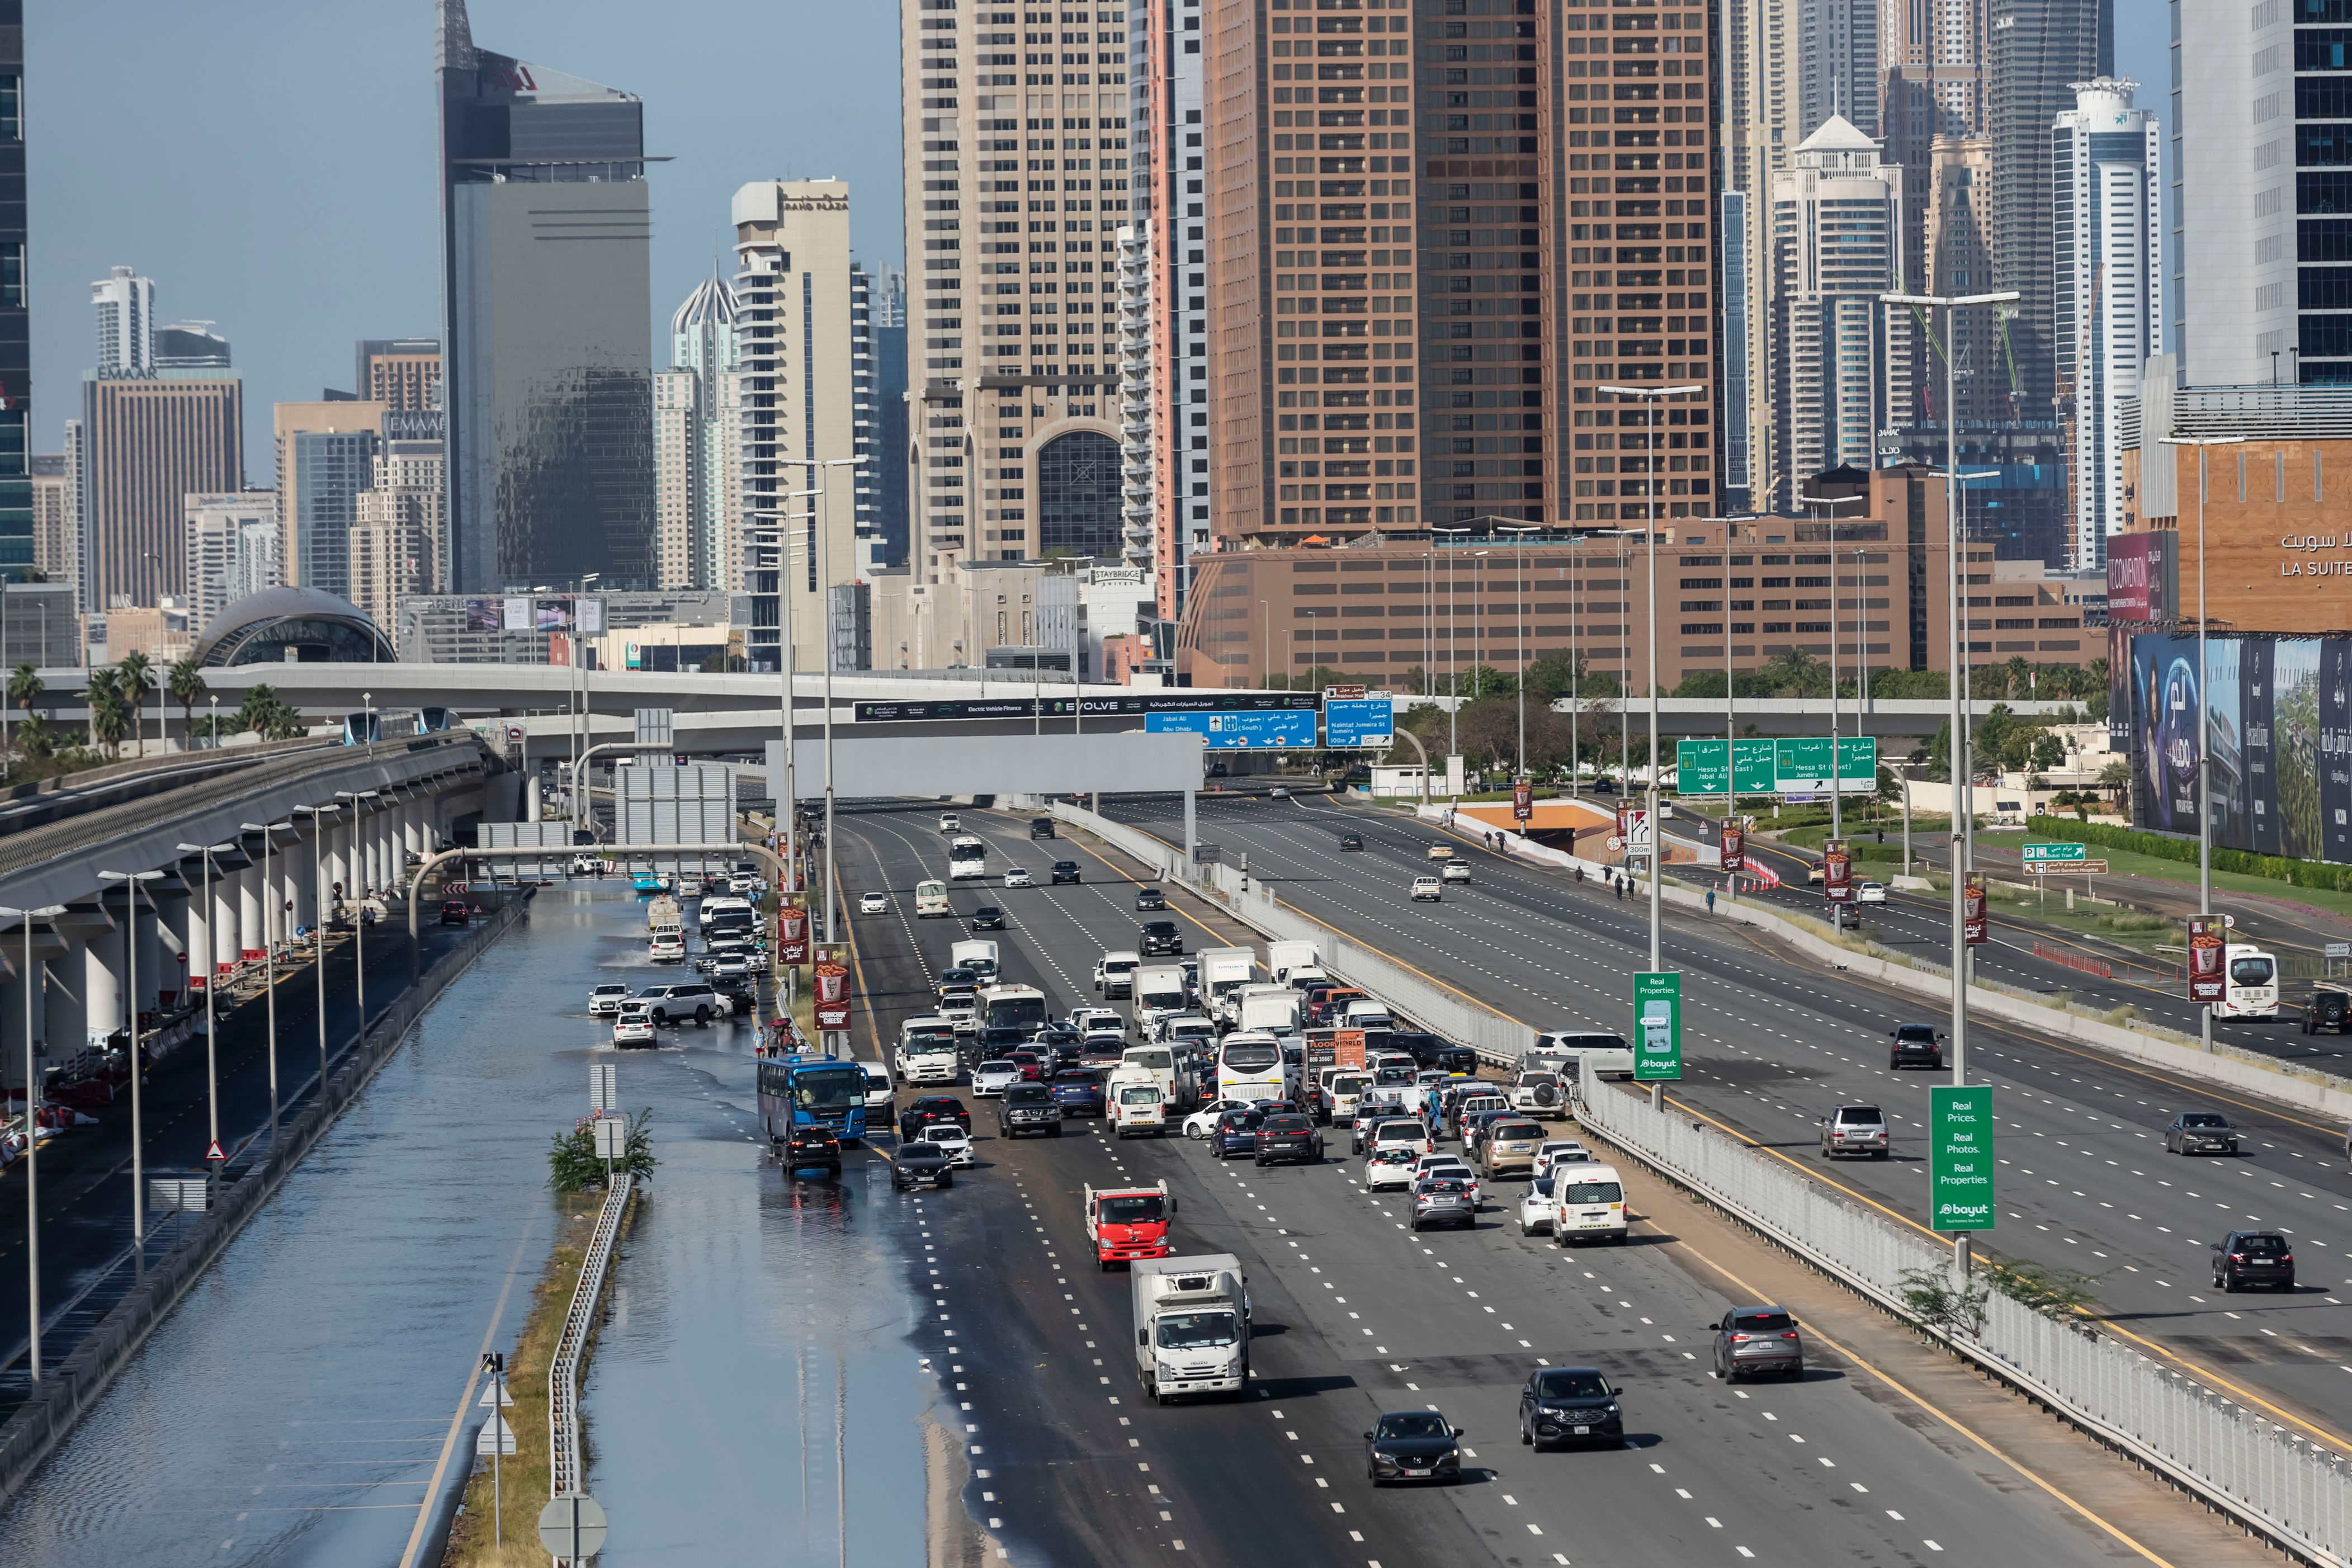 dubai residents ‘stuck in offices for over 30 hours’ as rain deluge causes chaos